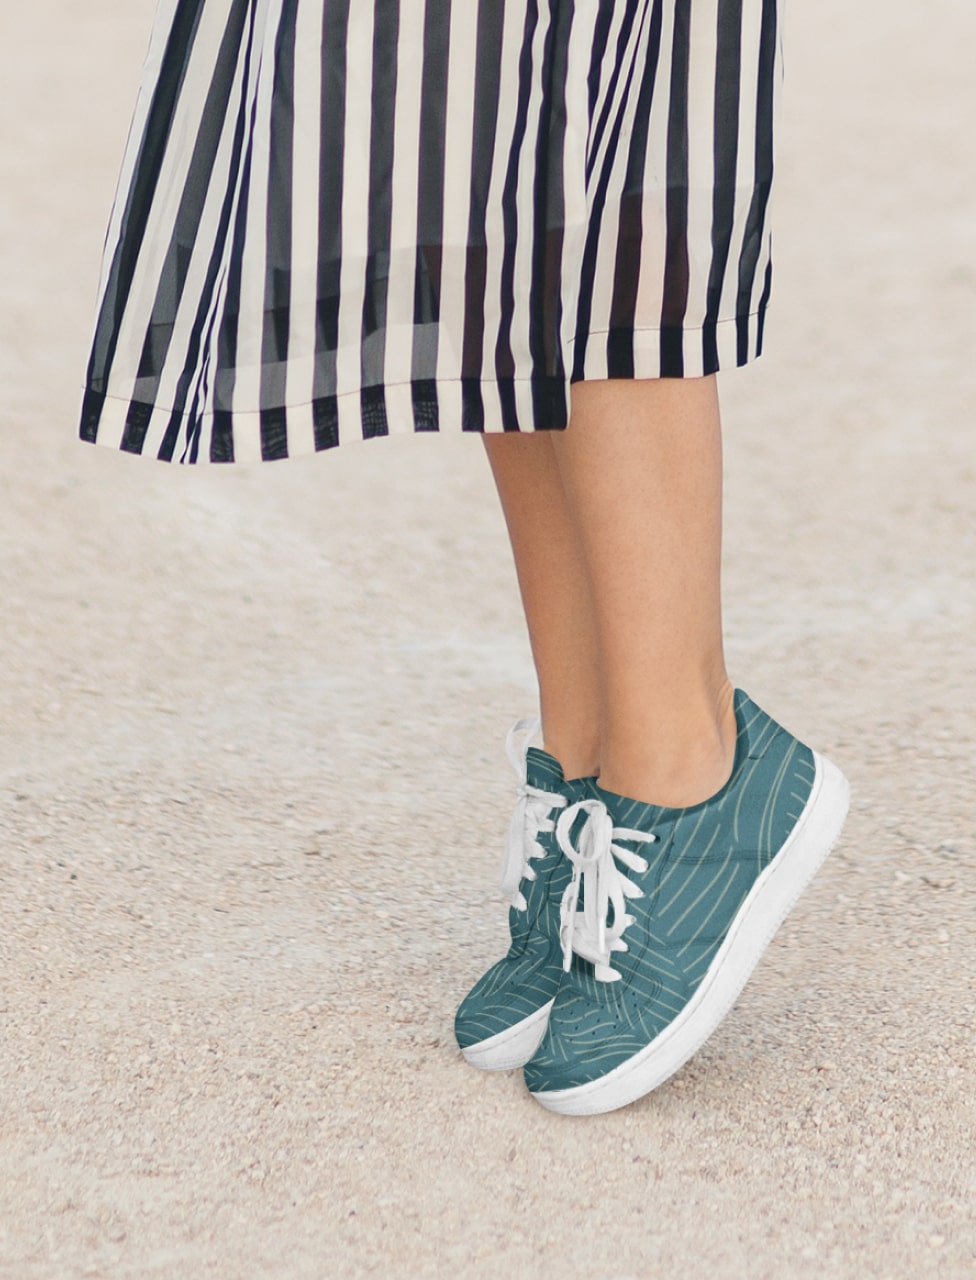 A cropped image of a woman wearing a pair of custom sneakers.